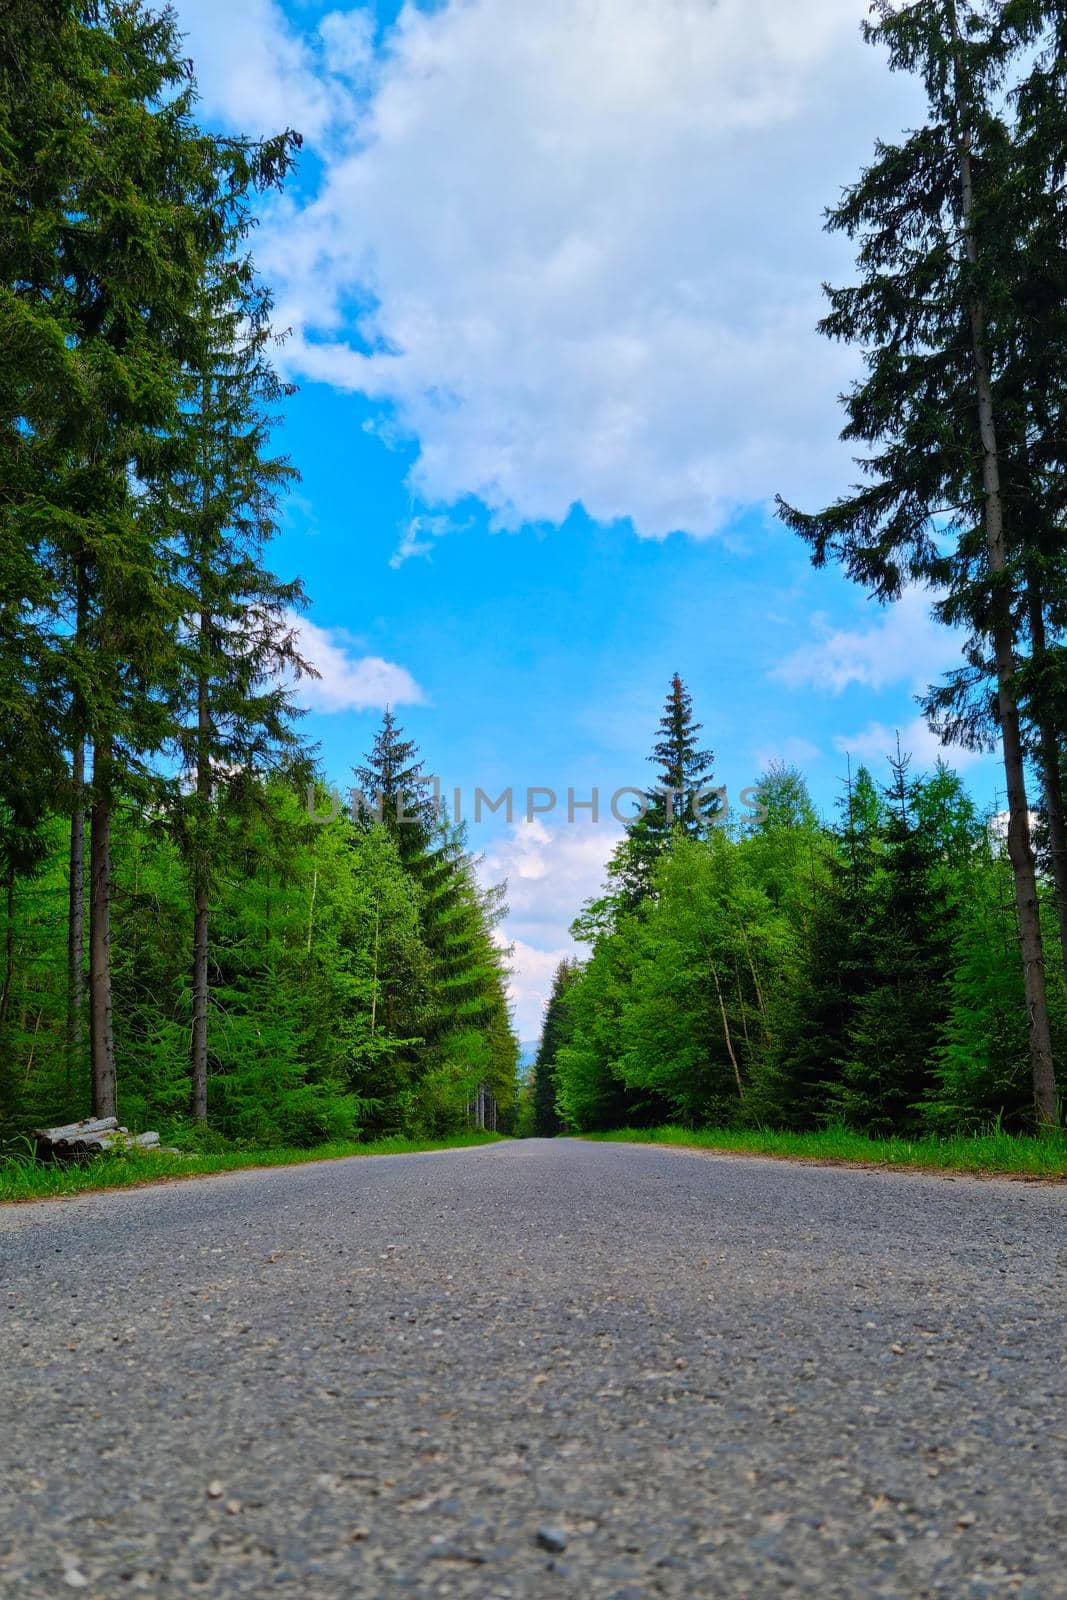 Beautiful picturesque road in the forest on a sunny day. by kip02kas